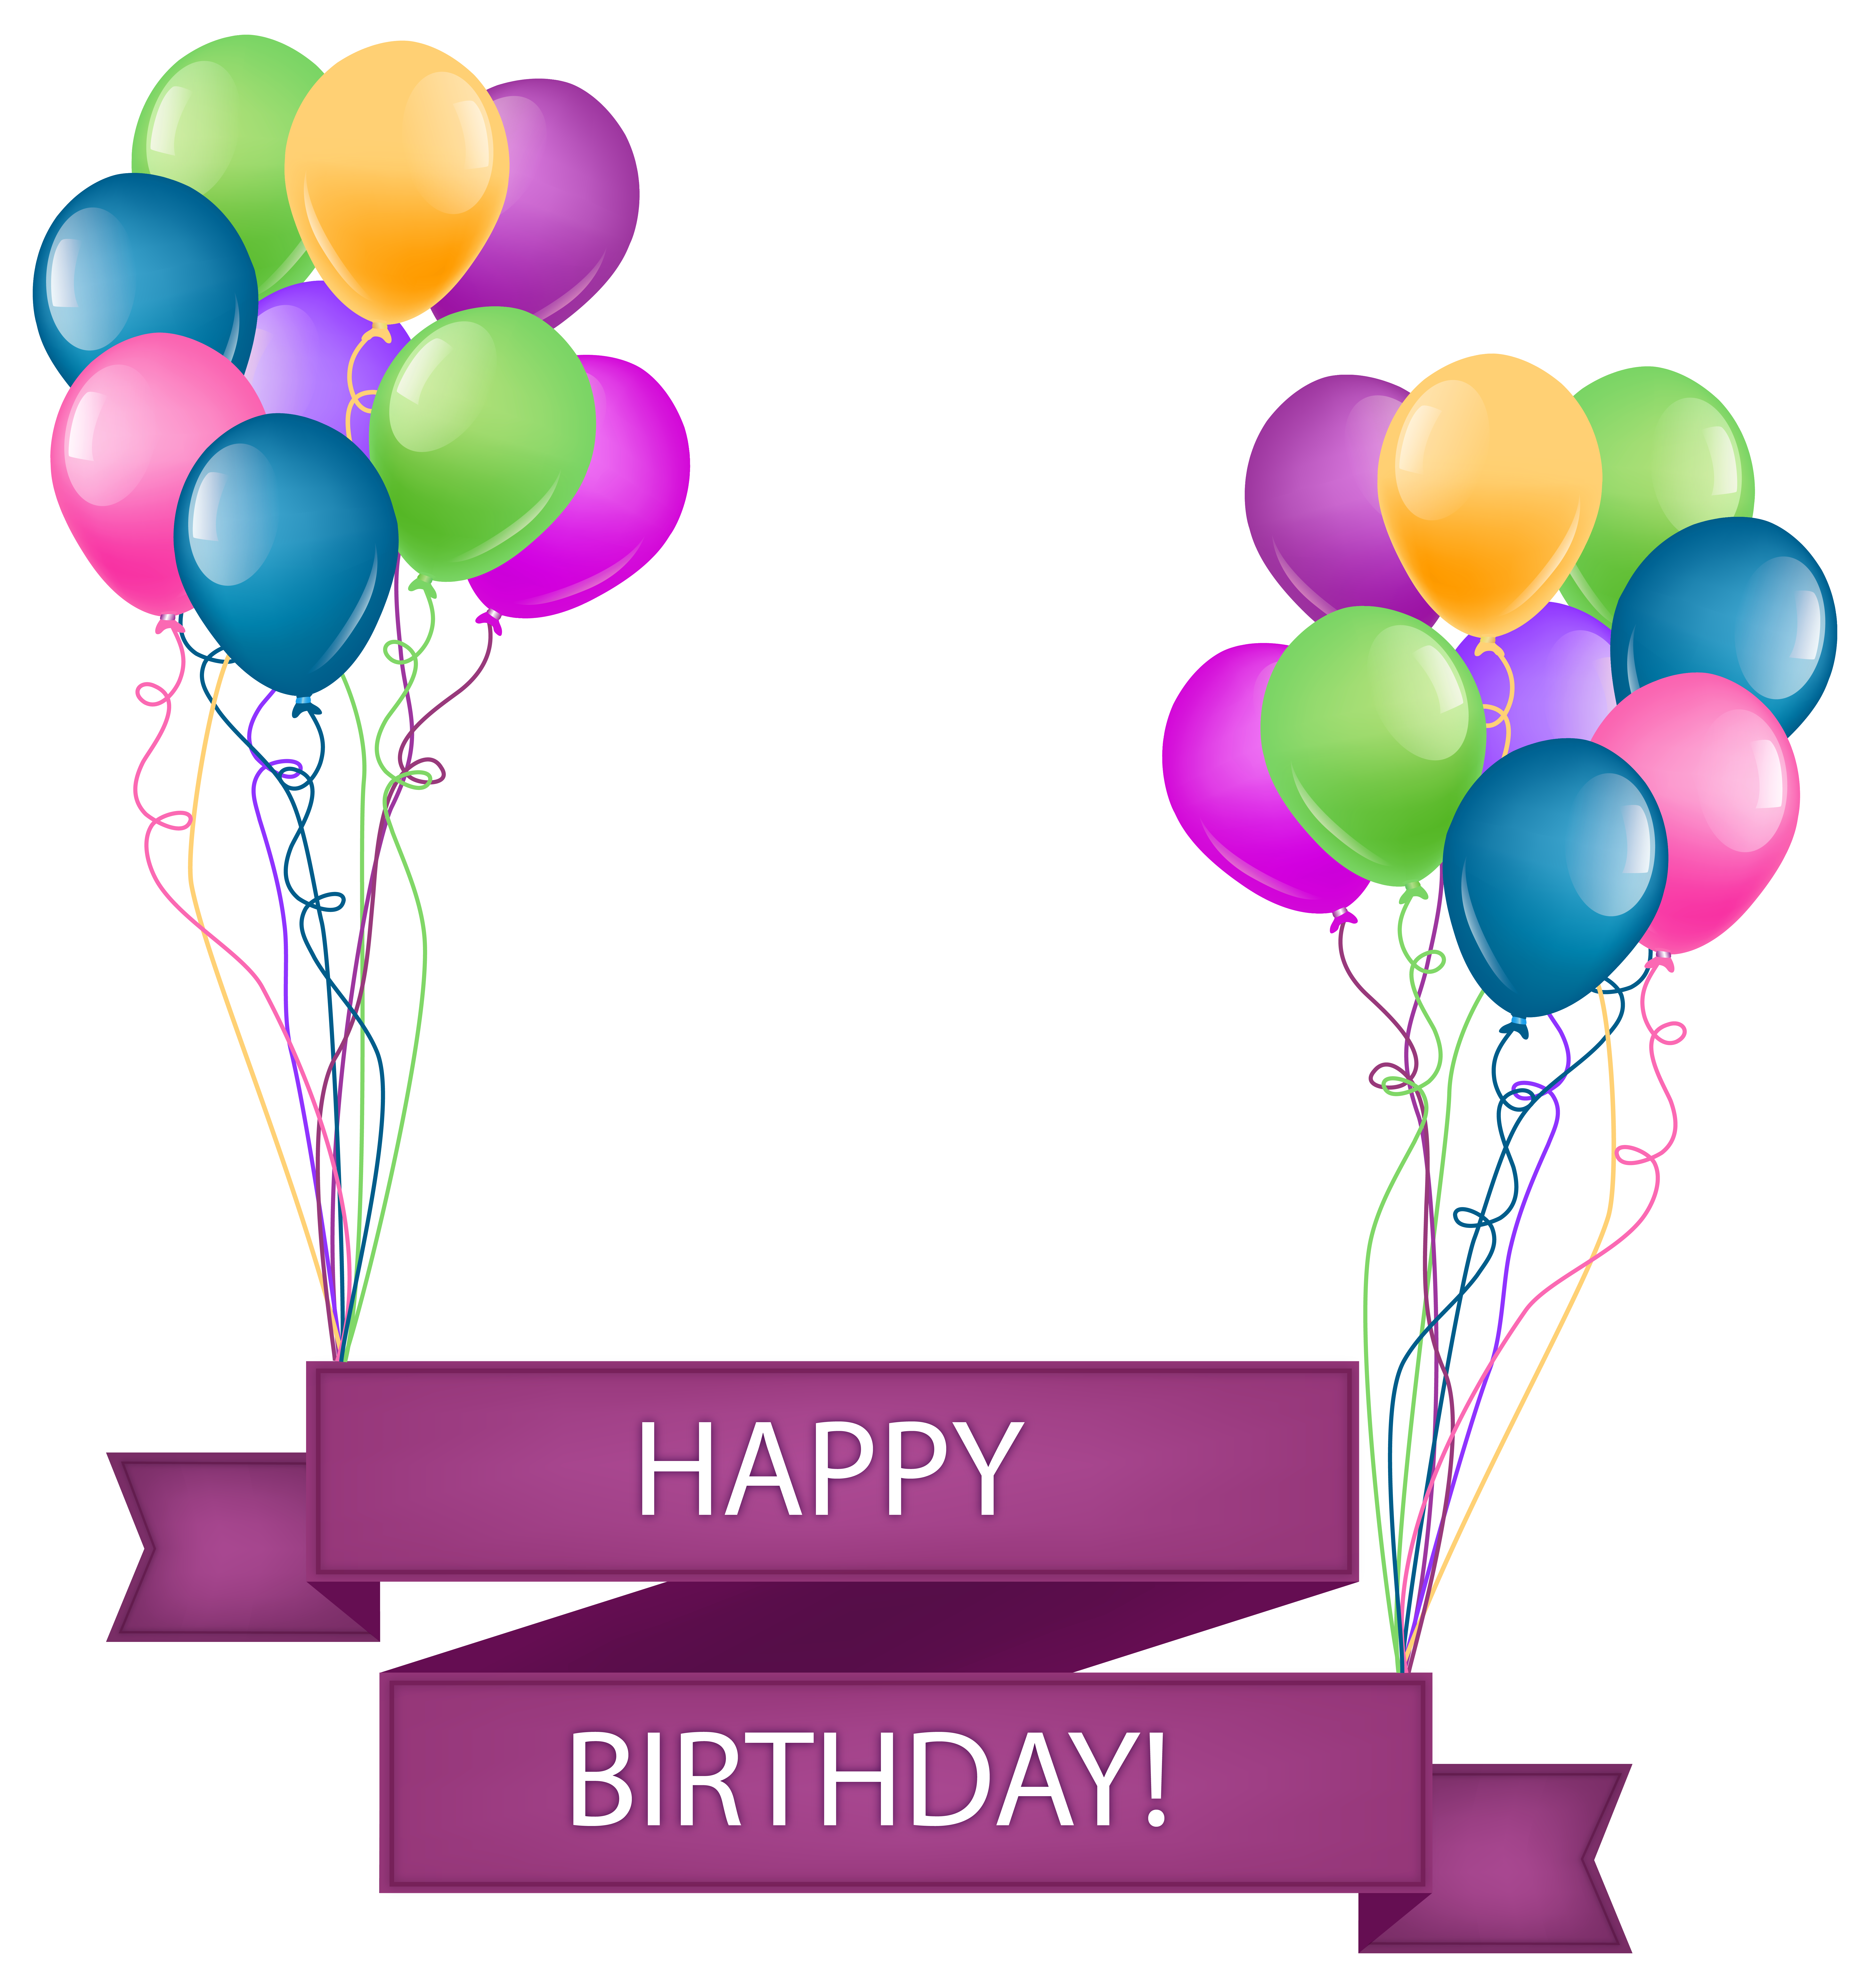 Streamers clipart lets celebrate. Happy birthday banner with